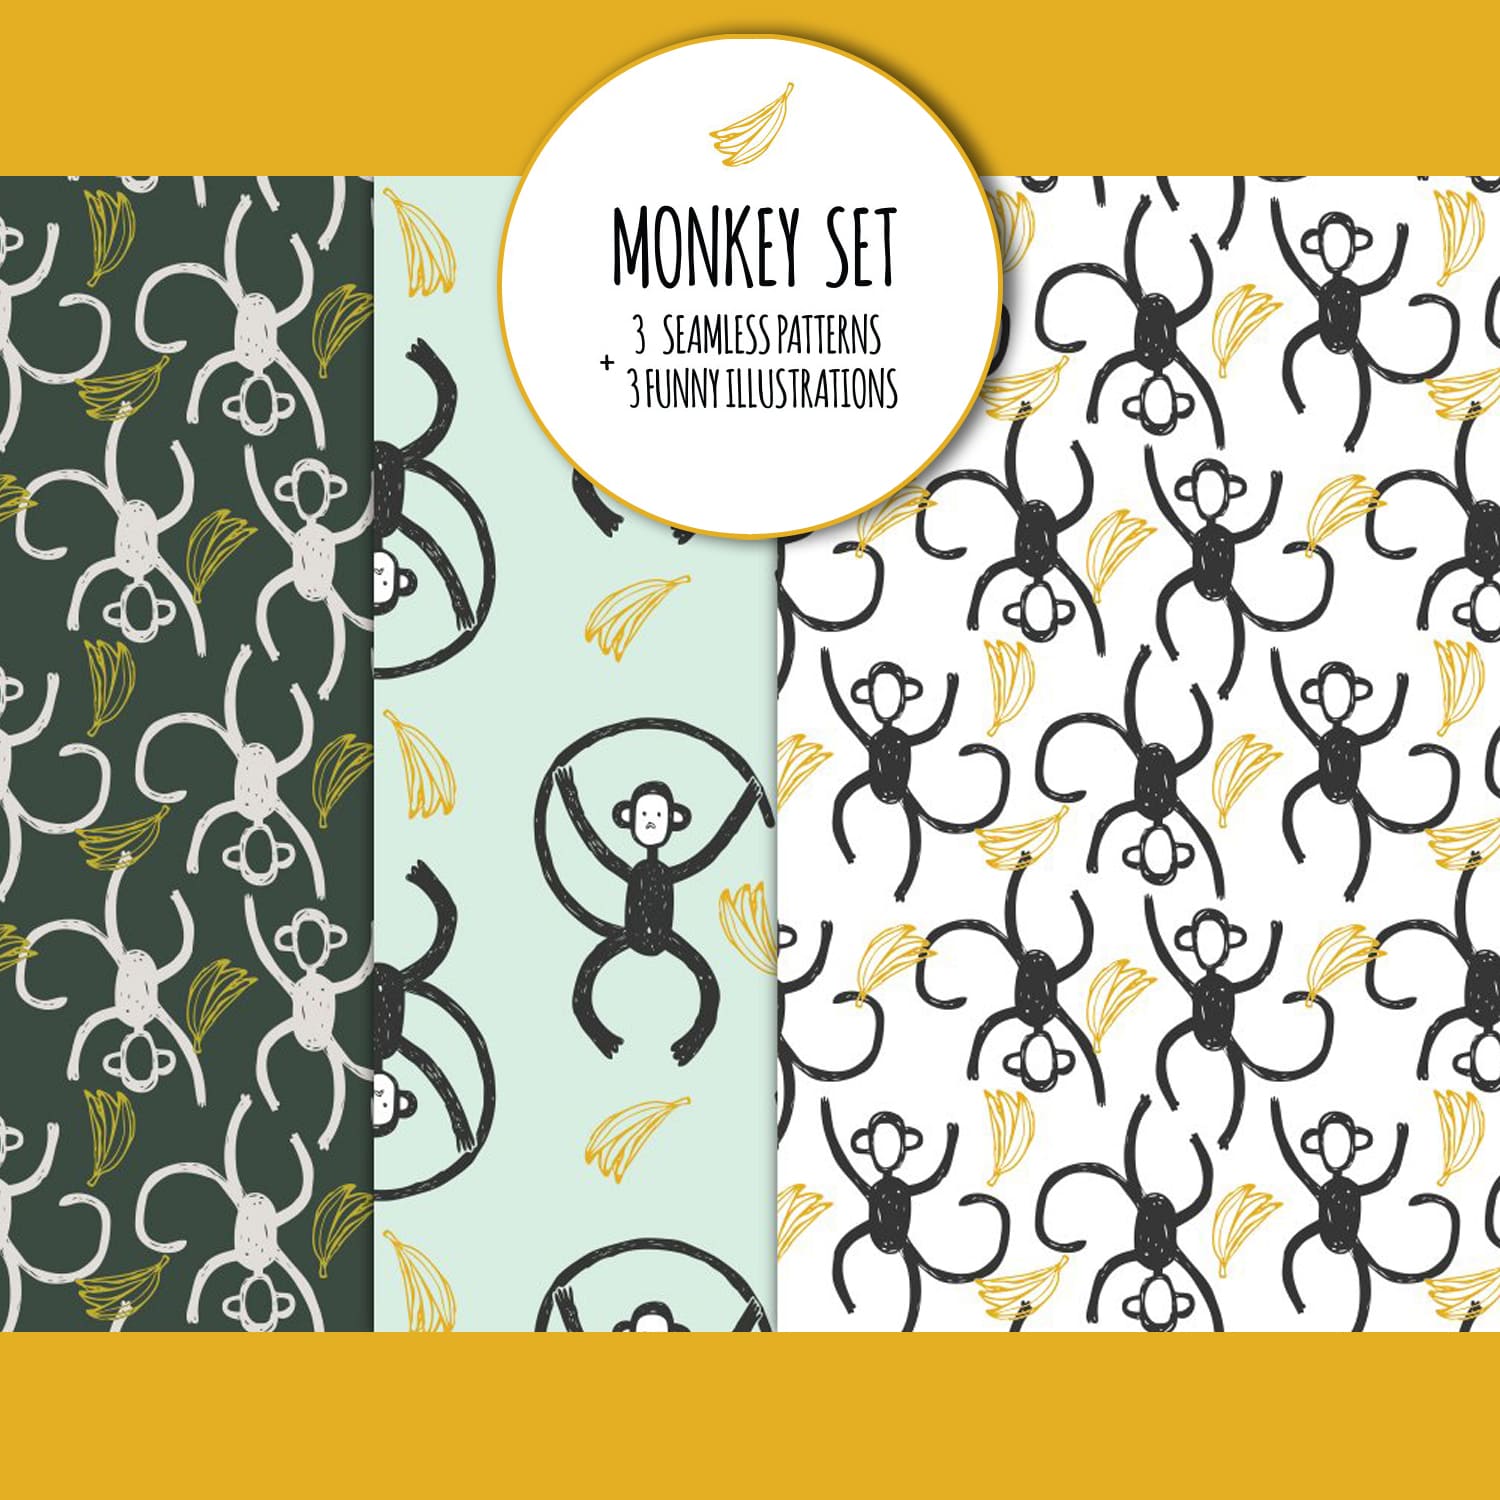 Monkey illustrations and patterns cover.